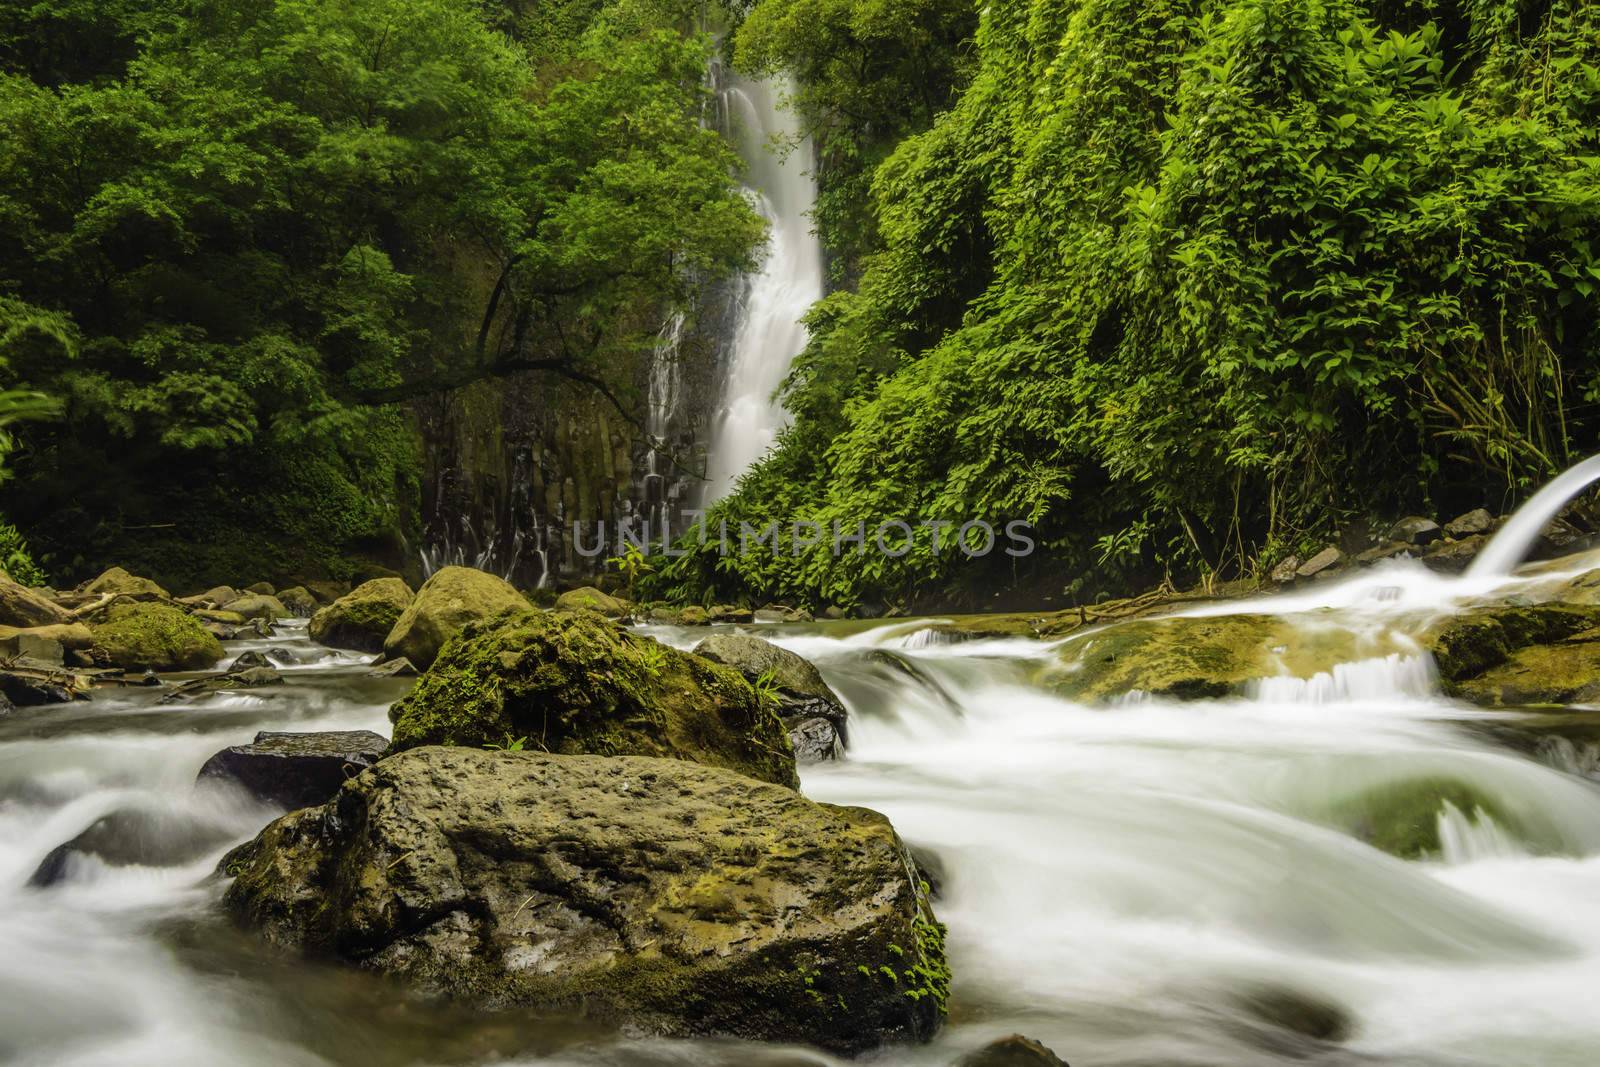 Mountain Stream-Costa Rica by billberryphotography